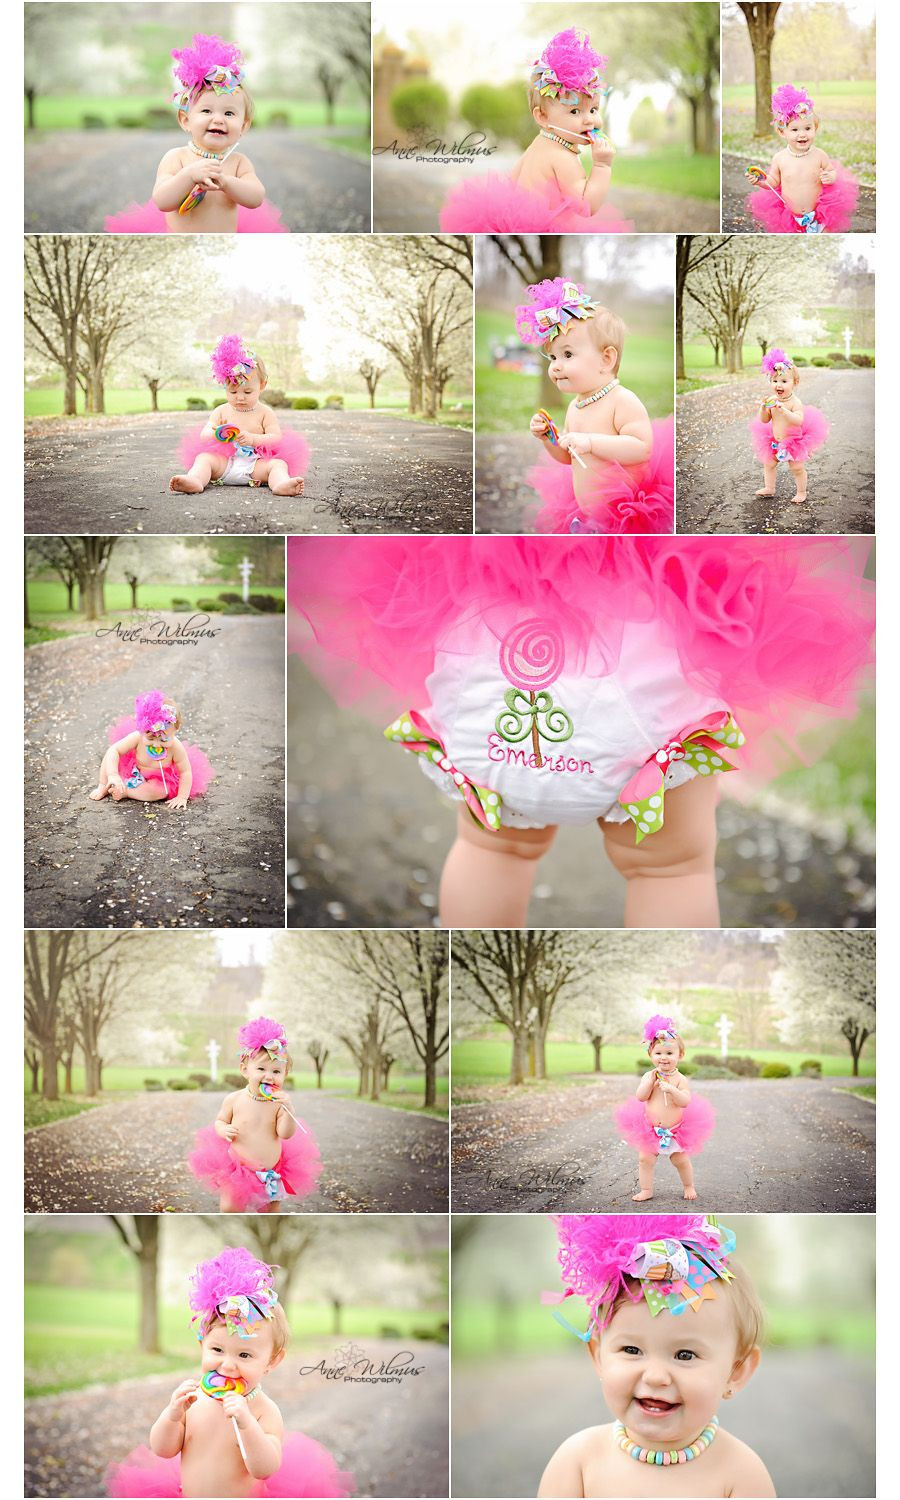 Baby'S First Birthday Gift Ideas For Her
 First birthday photo shoot place Love her candy necklace